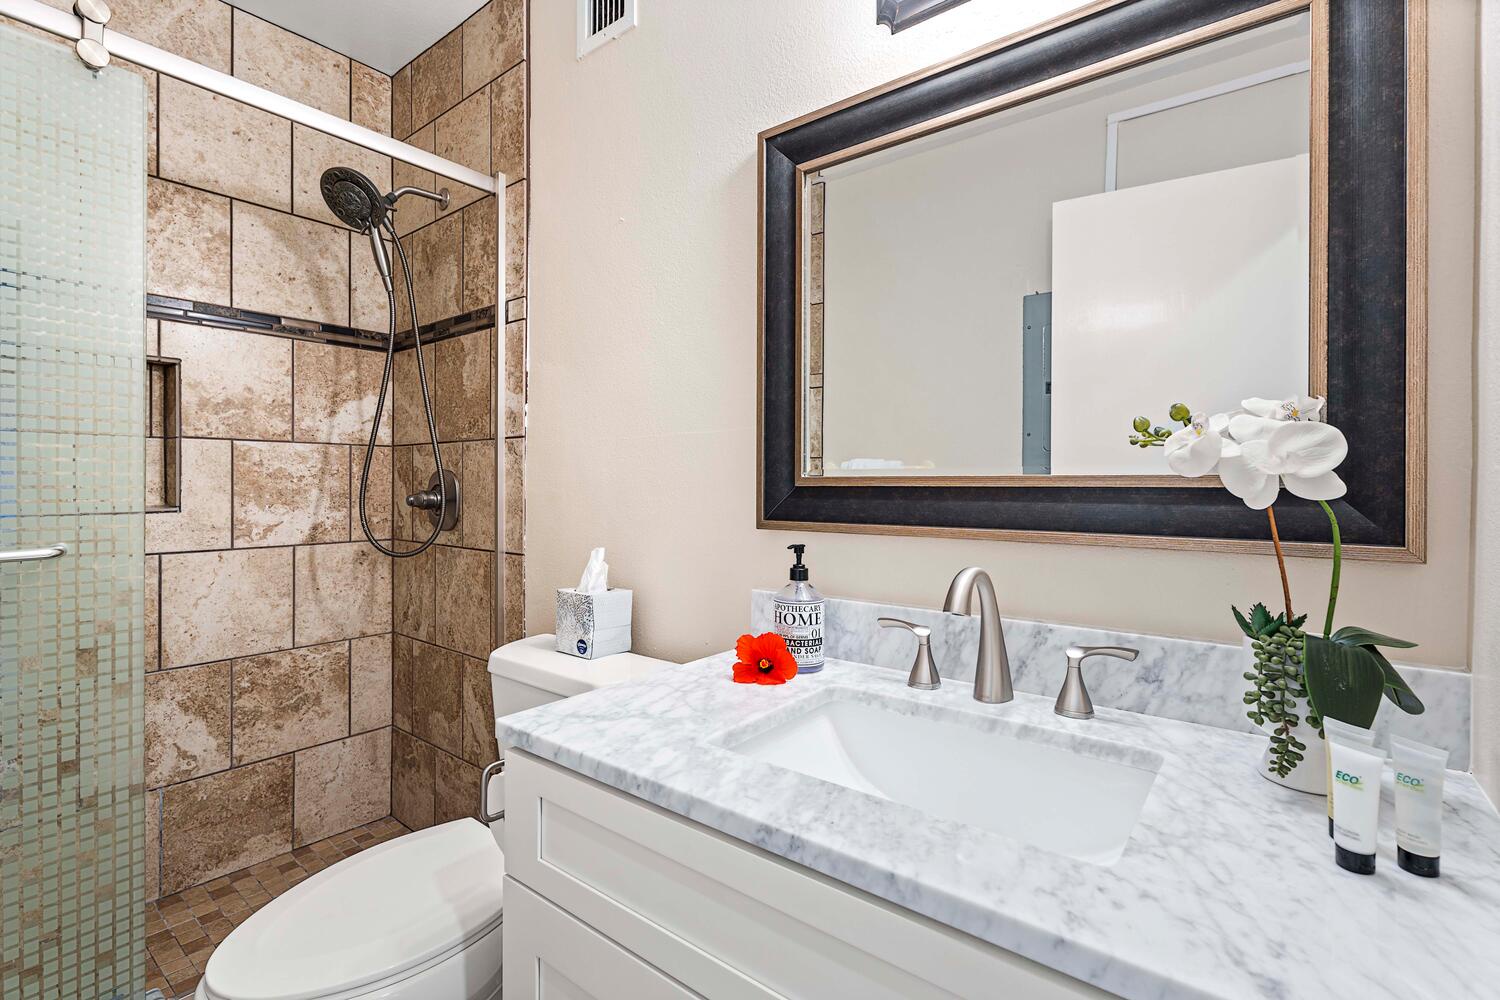 Kailua Kona Vacation Rentals, Keauhou Kona Surf & Racquet 1104 - Chic ensuite bathroom featuring a streamlined single sink – a perfect blend of style and convenience for your personal retreat.